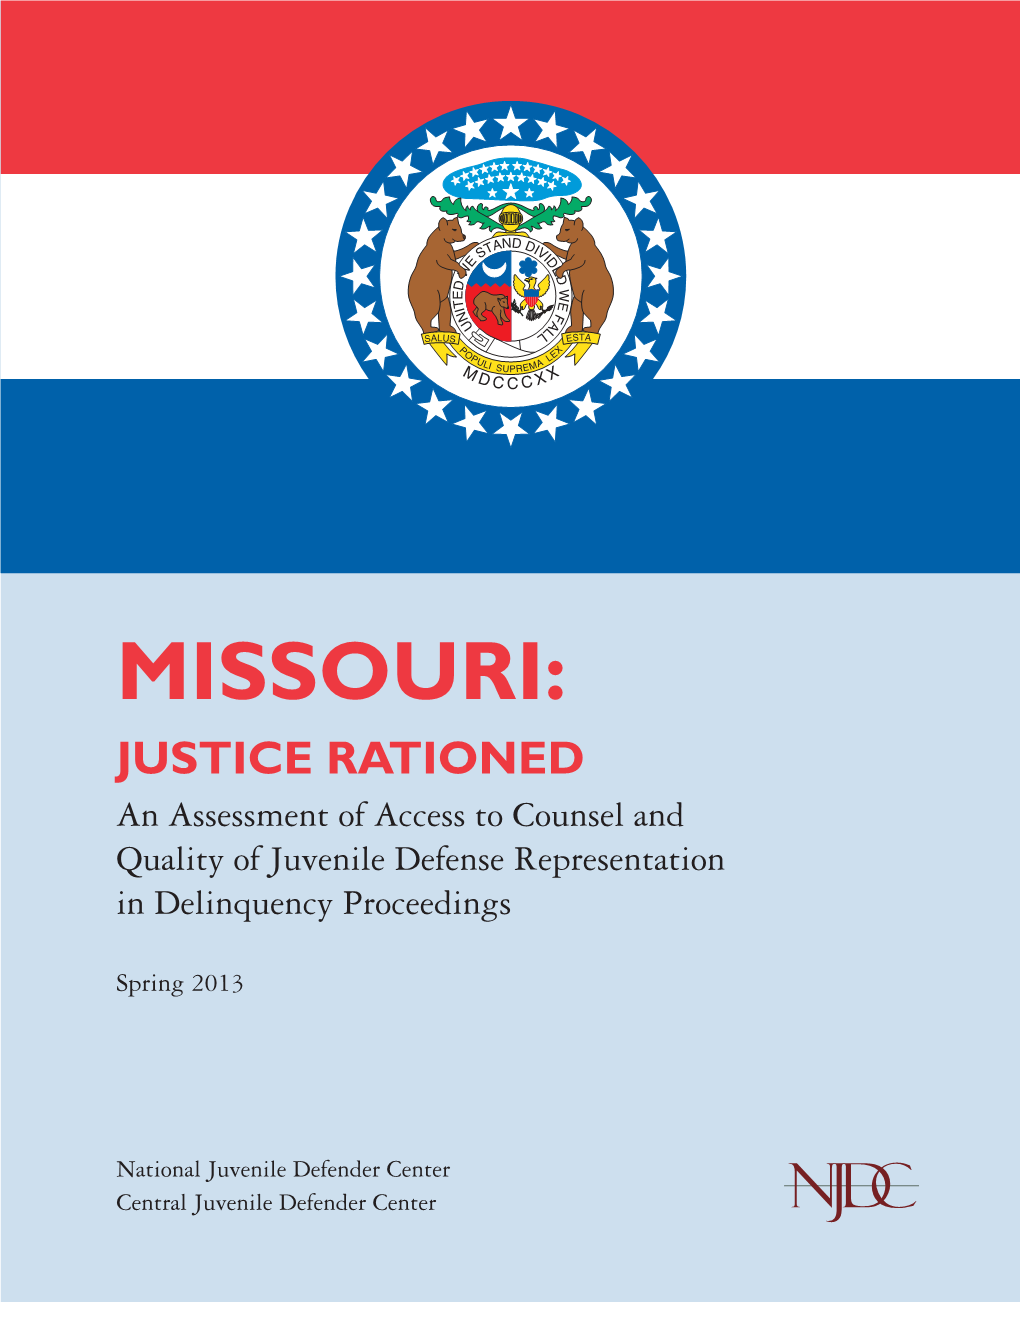 MISSOURI: JUSTICE RATIONED an Assessment of Access to Counsel and Quality of Juvenile Defense Representation in Delinquency Proceedings